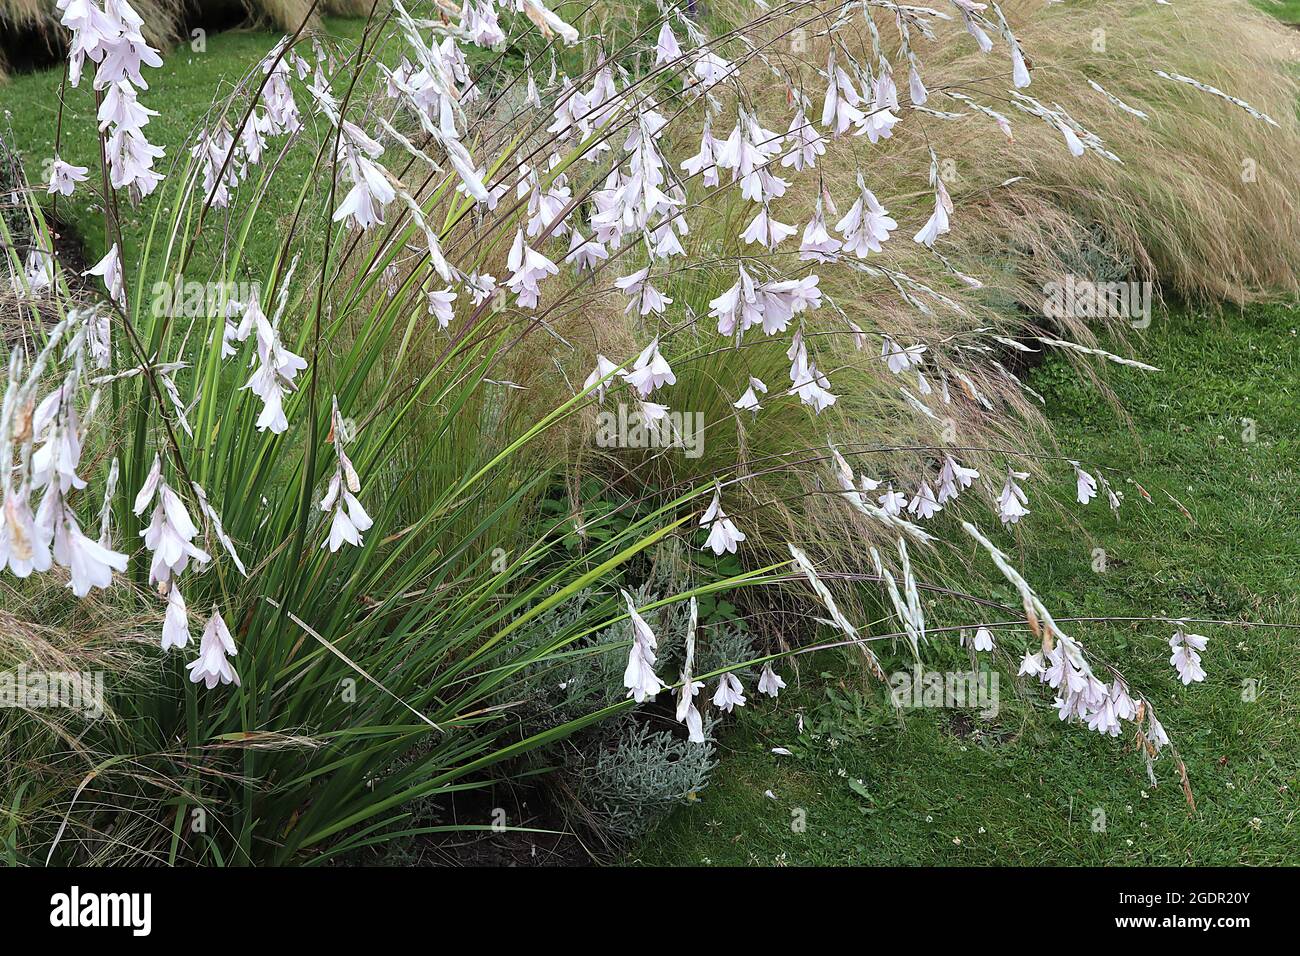 https://c8.alamy.com/comp/2GDR20Y/dierama-guinevere-angels-fishing-rod-guinevere-arching-stems-of-white-pendulous-flowers-july-england-uk-2GDR20Y.jpg